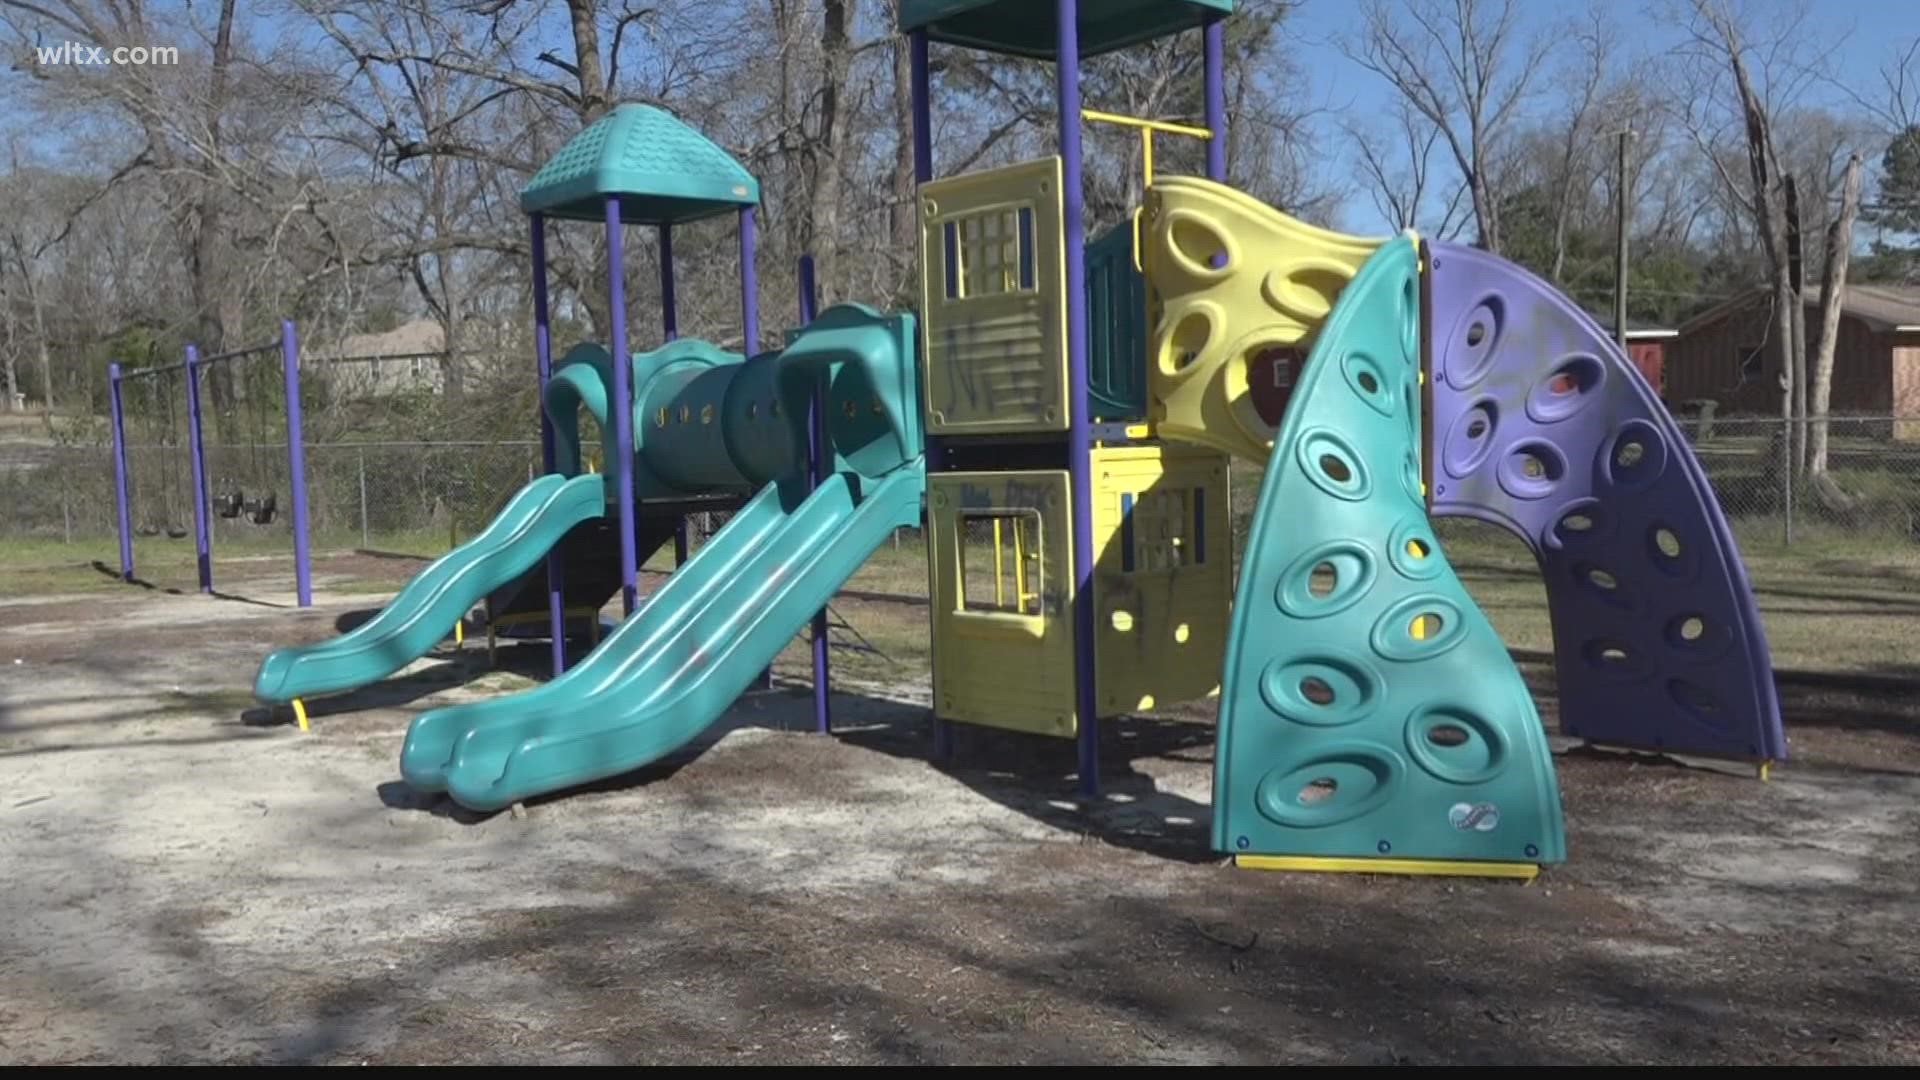 Orangeburg Parks and Recreation is making improvements this Spring and is expected to be completed by May 15.